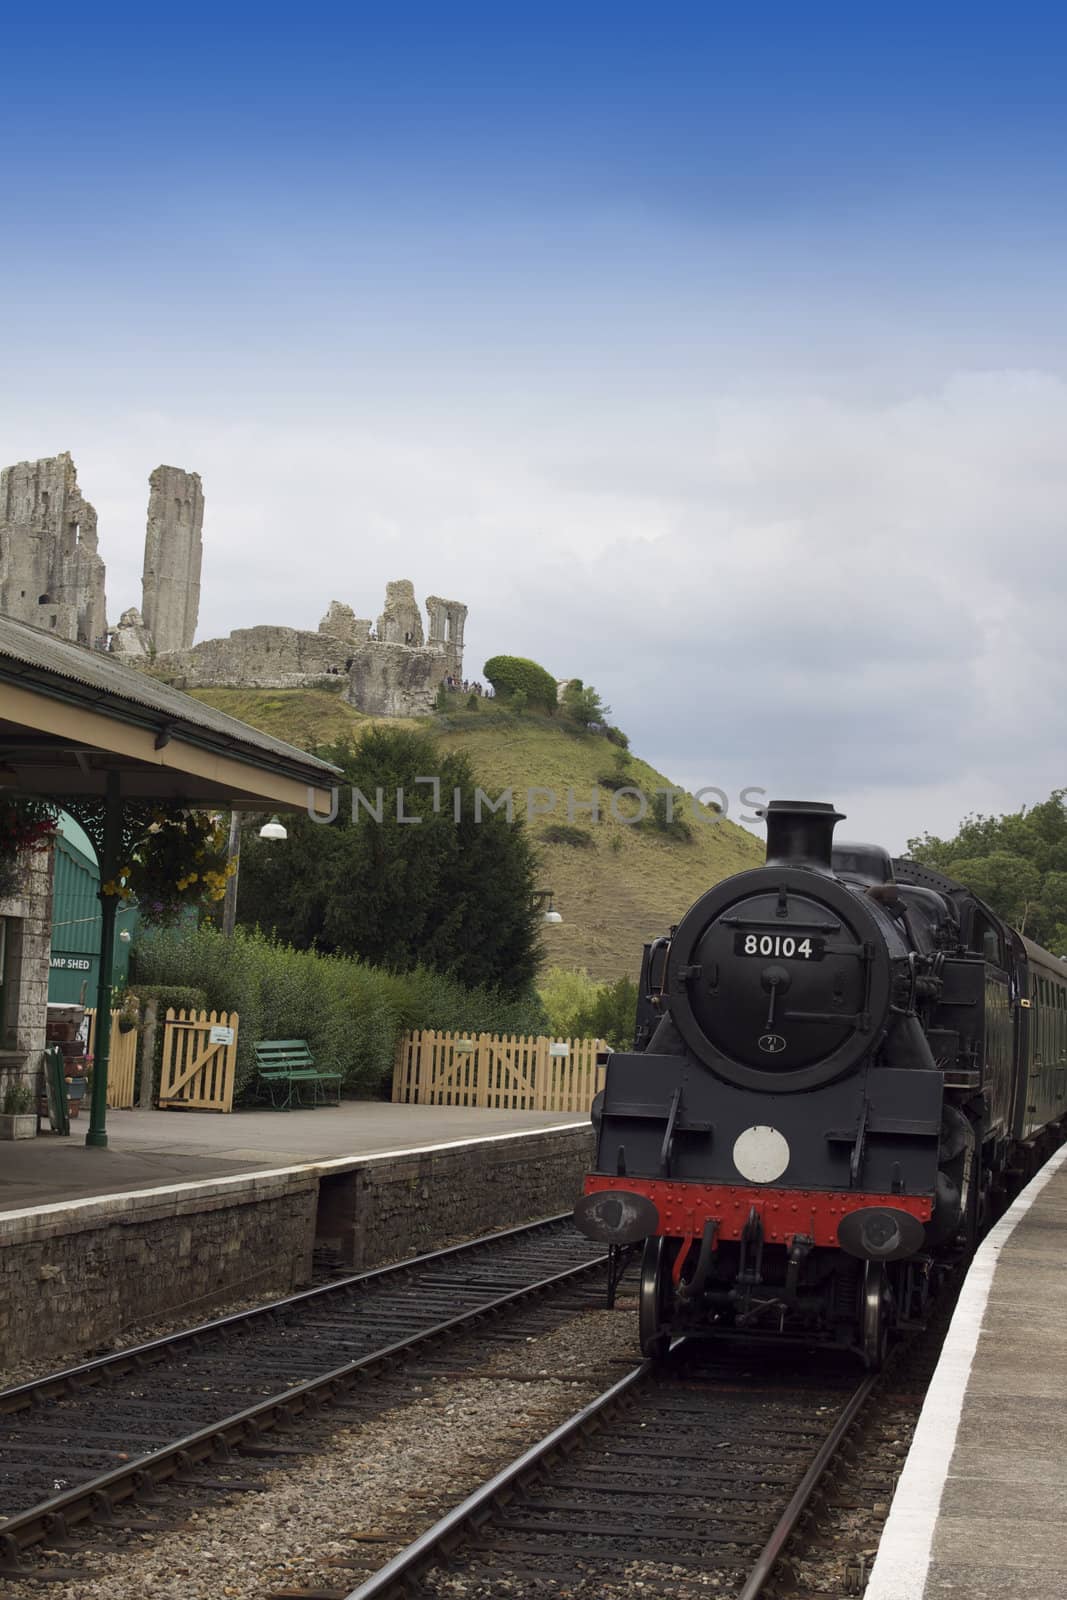 A steam train arriving at Corfe Castle Railway Station, on the Swanage railway service. Located in Dorset, Hampshire. The ruins of Corfe Castle visible in the background.